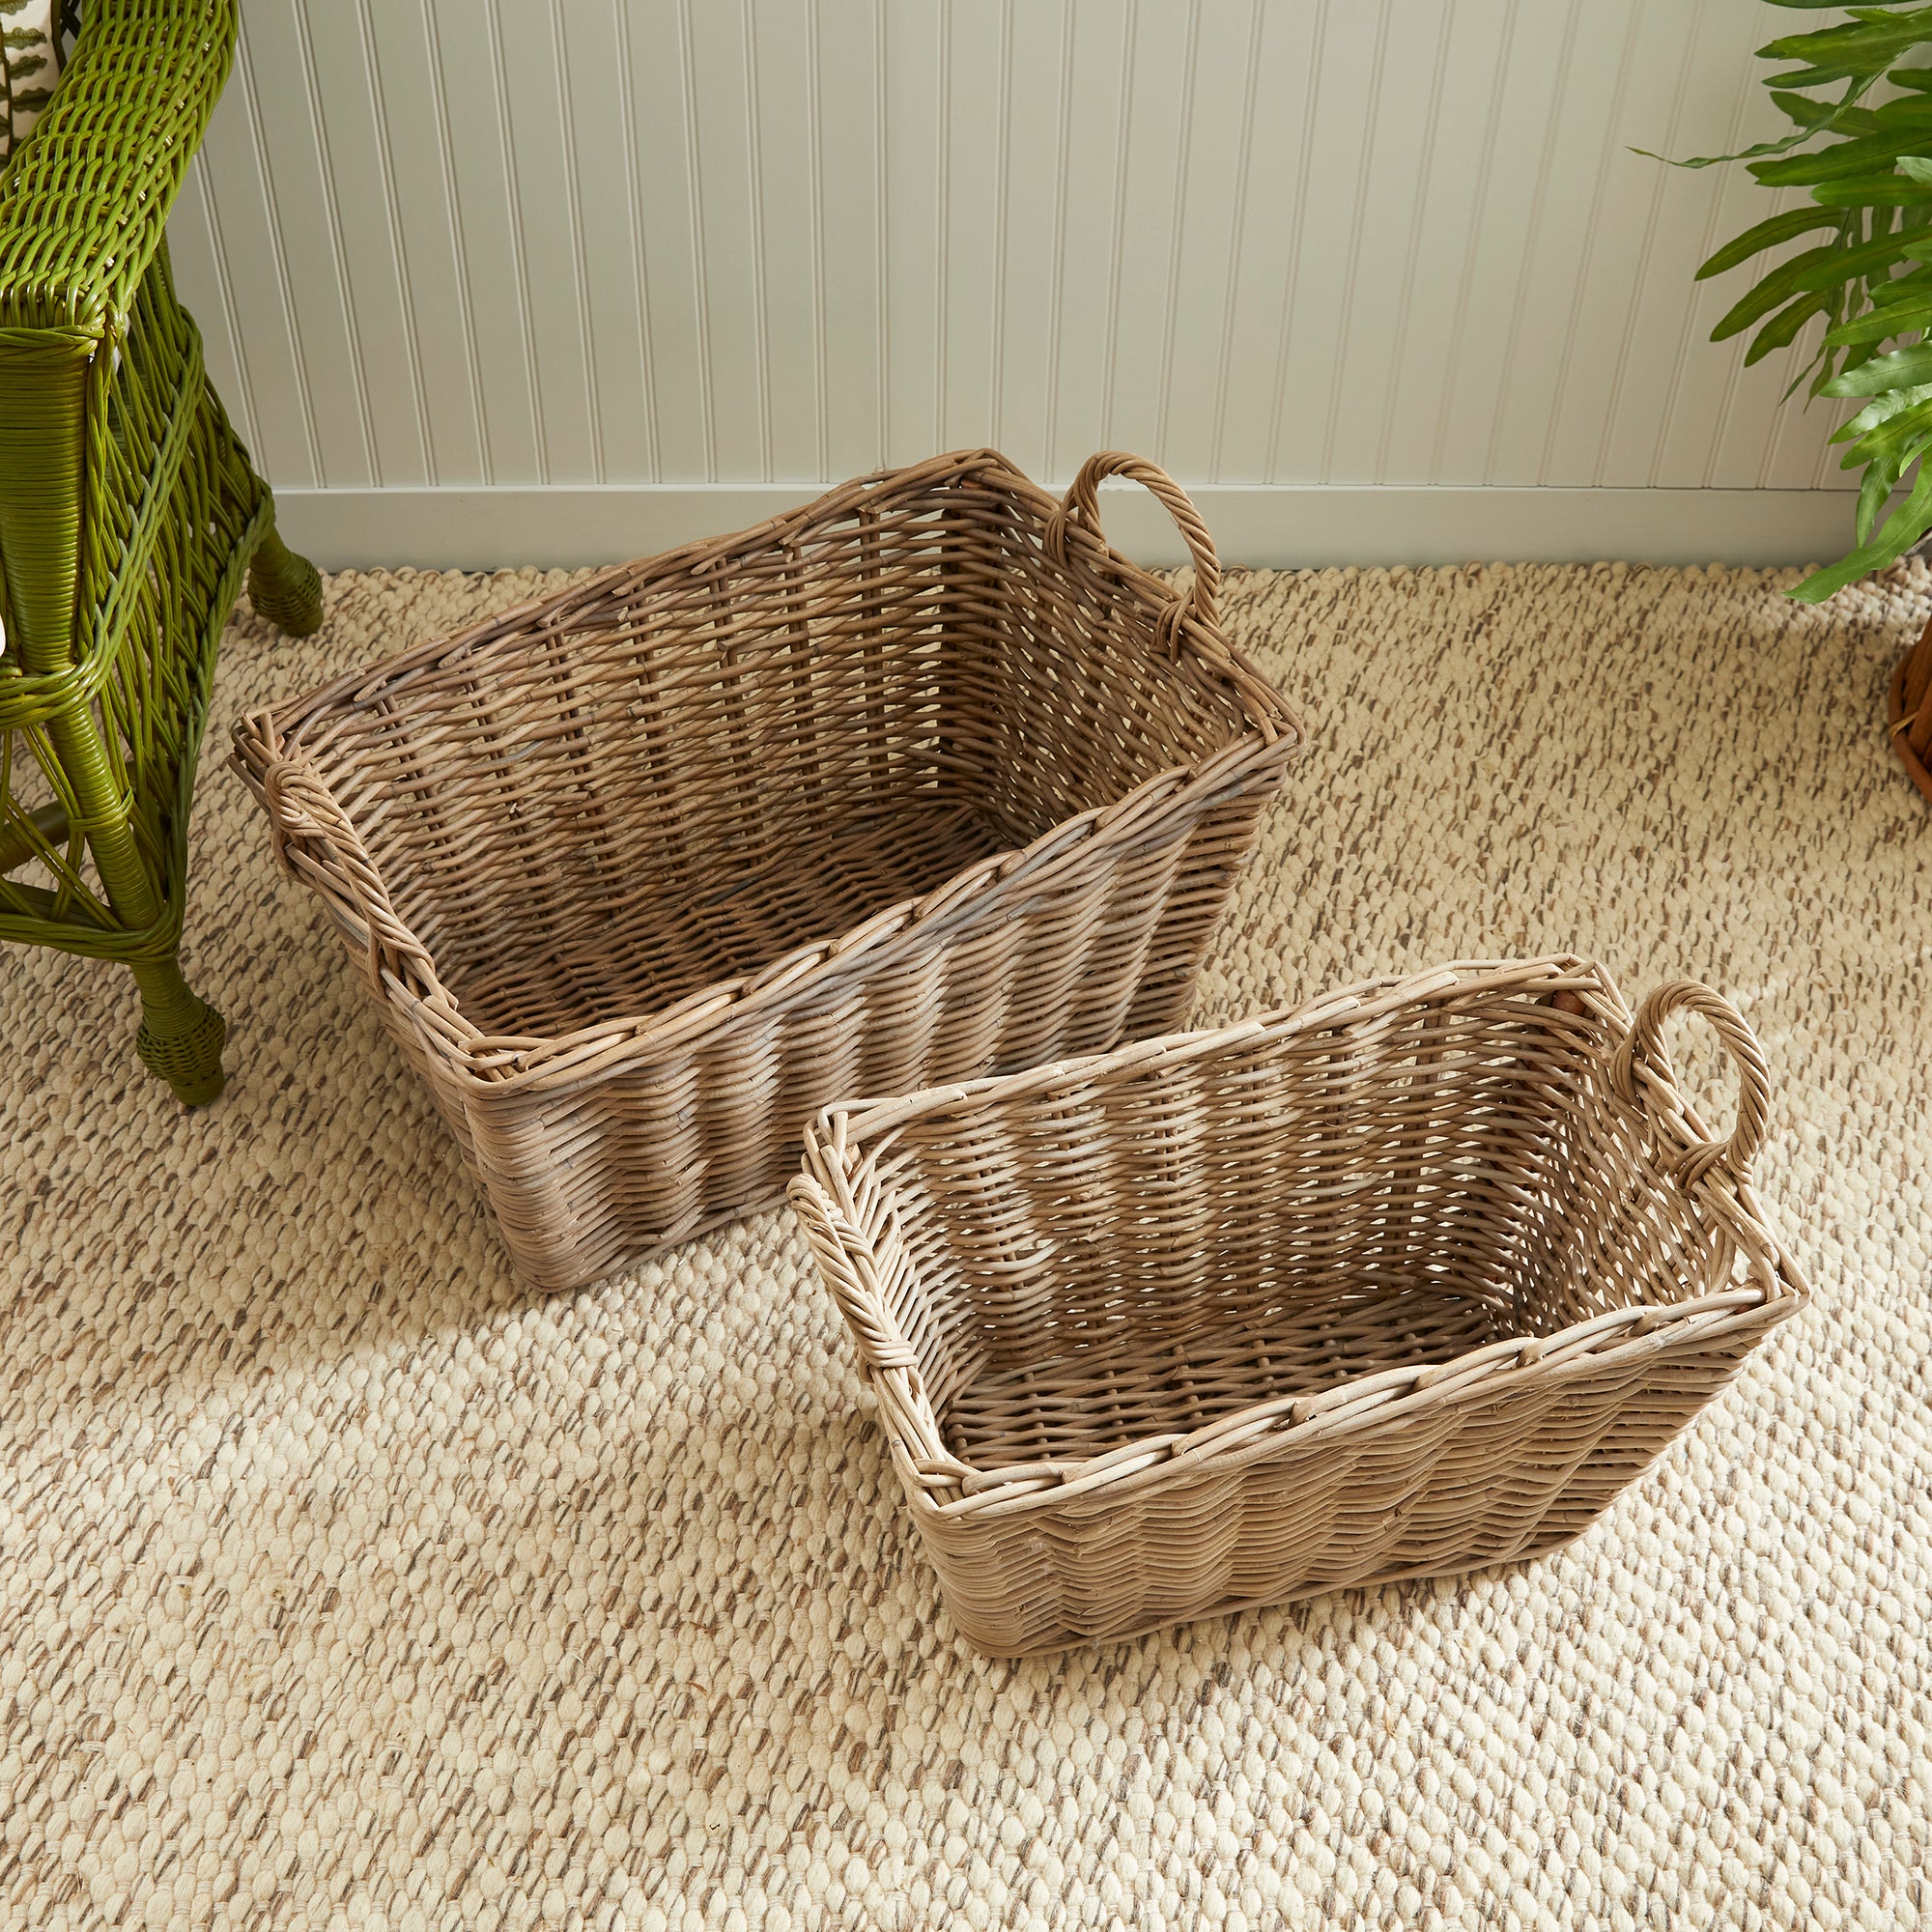 When it comes to the classic, casual appeal of rattan, these baskets are some of the best. They make a great set of laundry baskets or any thing you need stored beautifully. Amethyst Home provides interior design, new construction, custom furniture, and area rugs in the Alpharetta metro area.